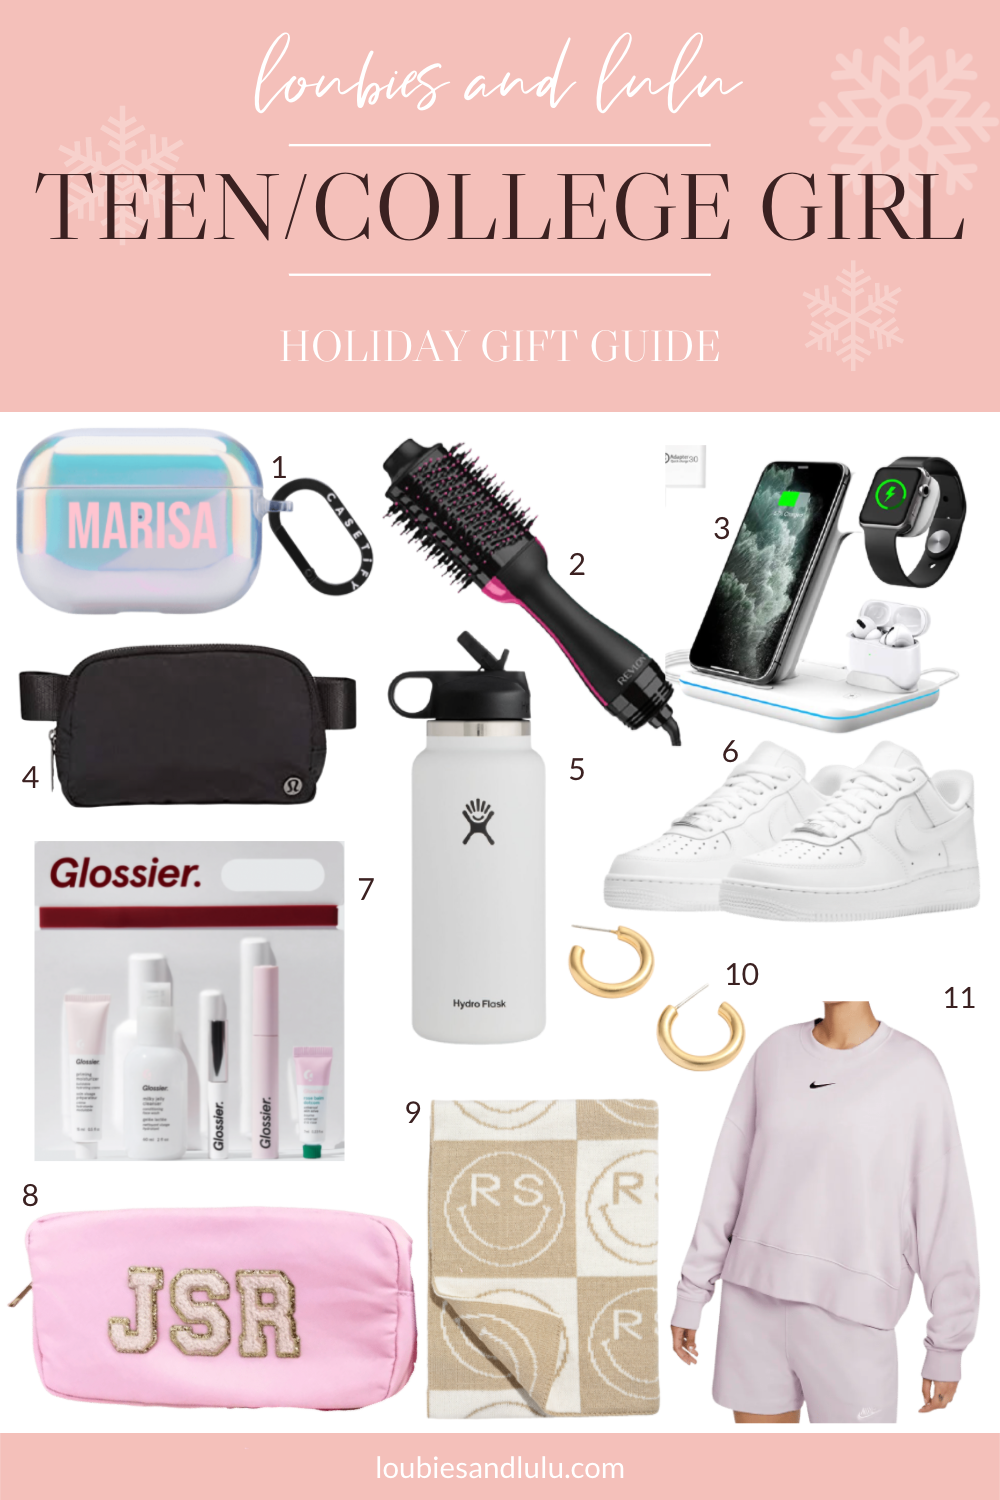 Gifts for Teens and College Girls